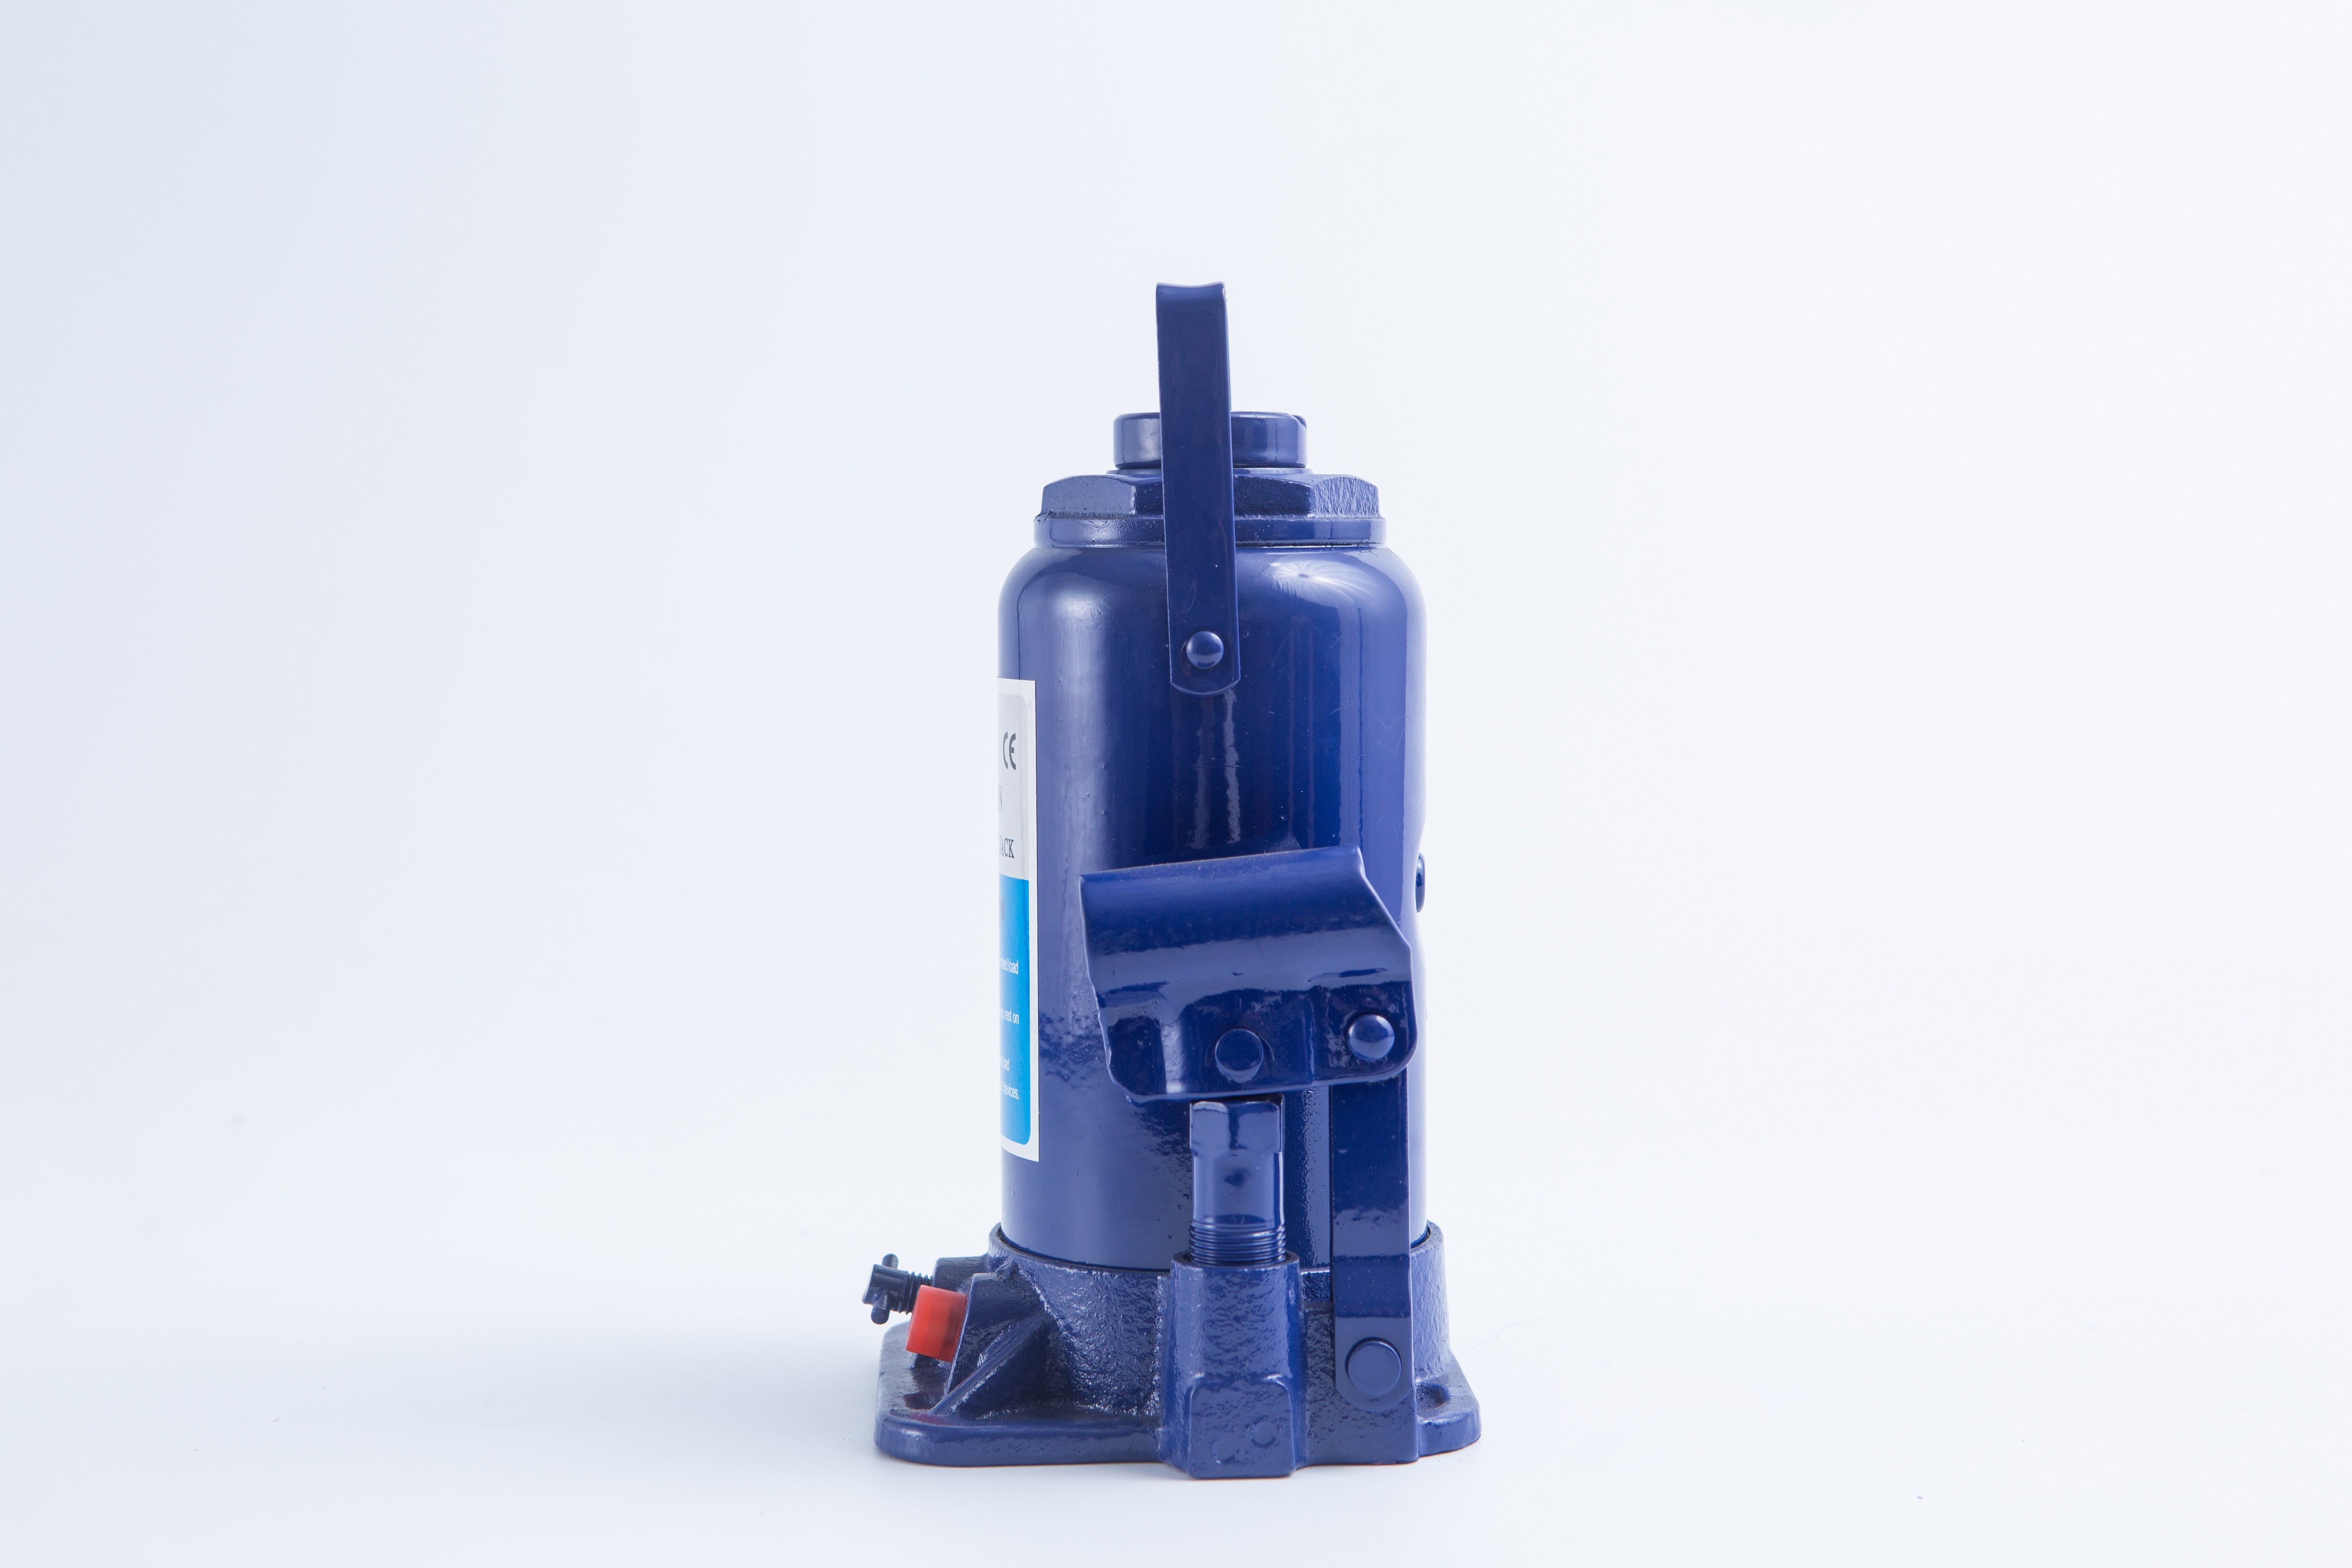 32T HYDRAULIC BOTTLE JACK WITH SAFETY RELIEF VAVLE